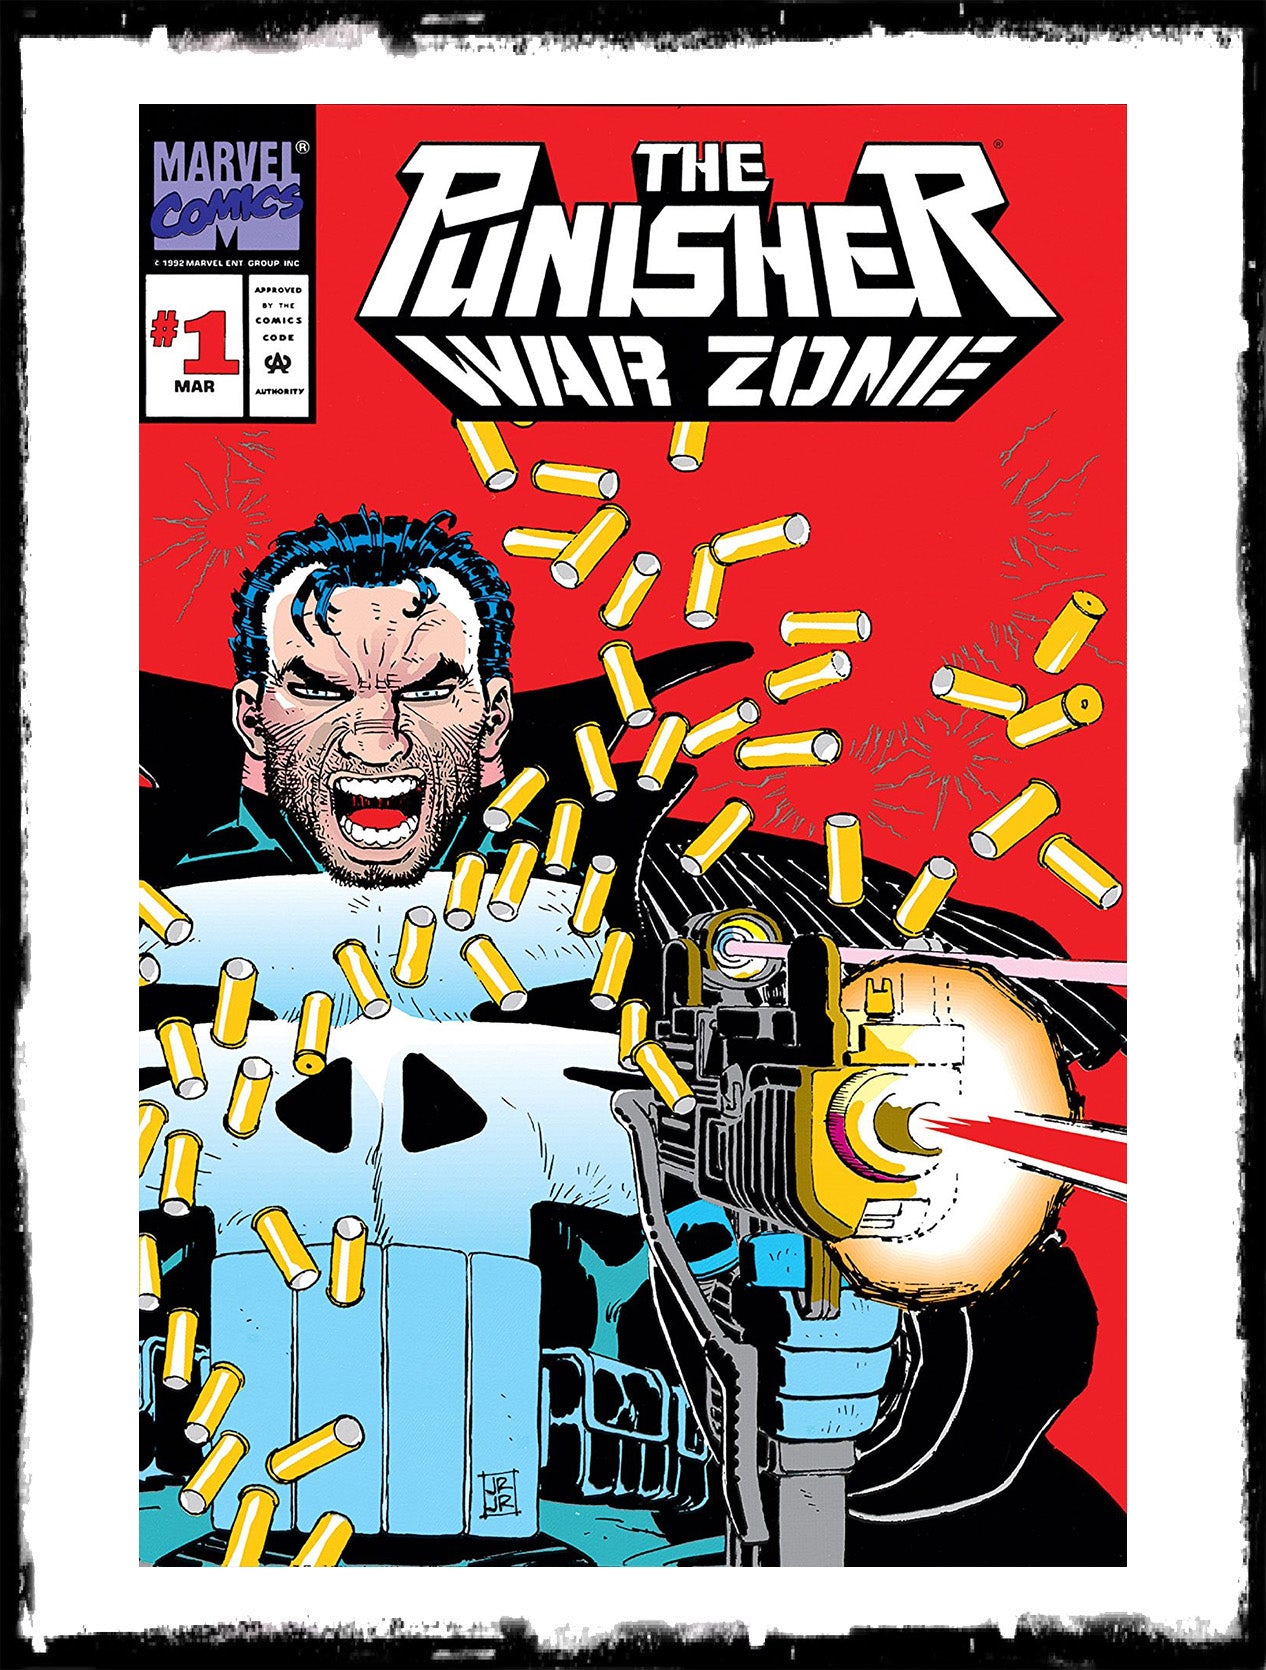 The Punisher War Zone 64 Page Annual Vol. 1 No. 1 1993 Marvel -  Israel